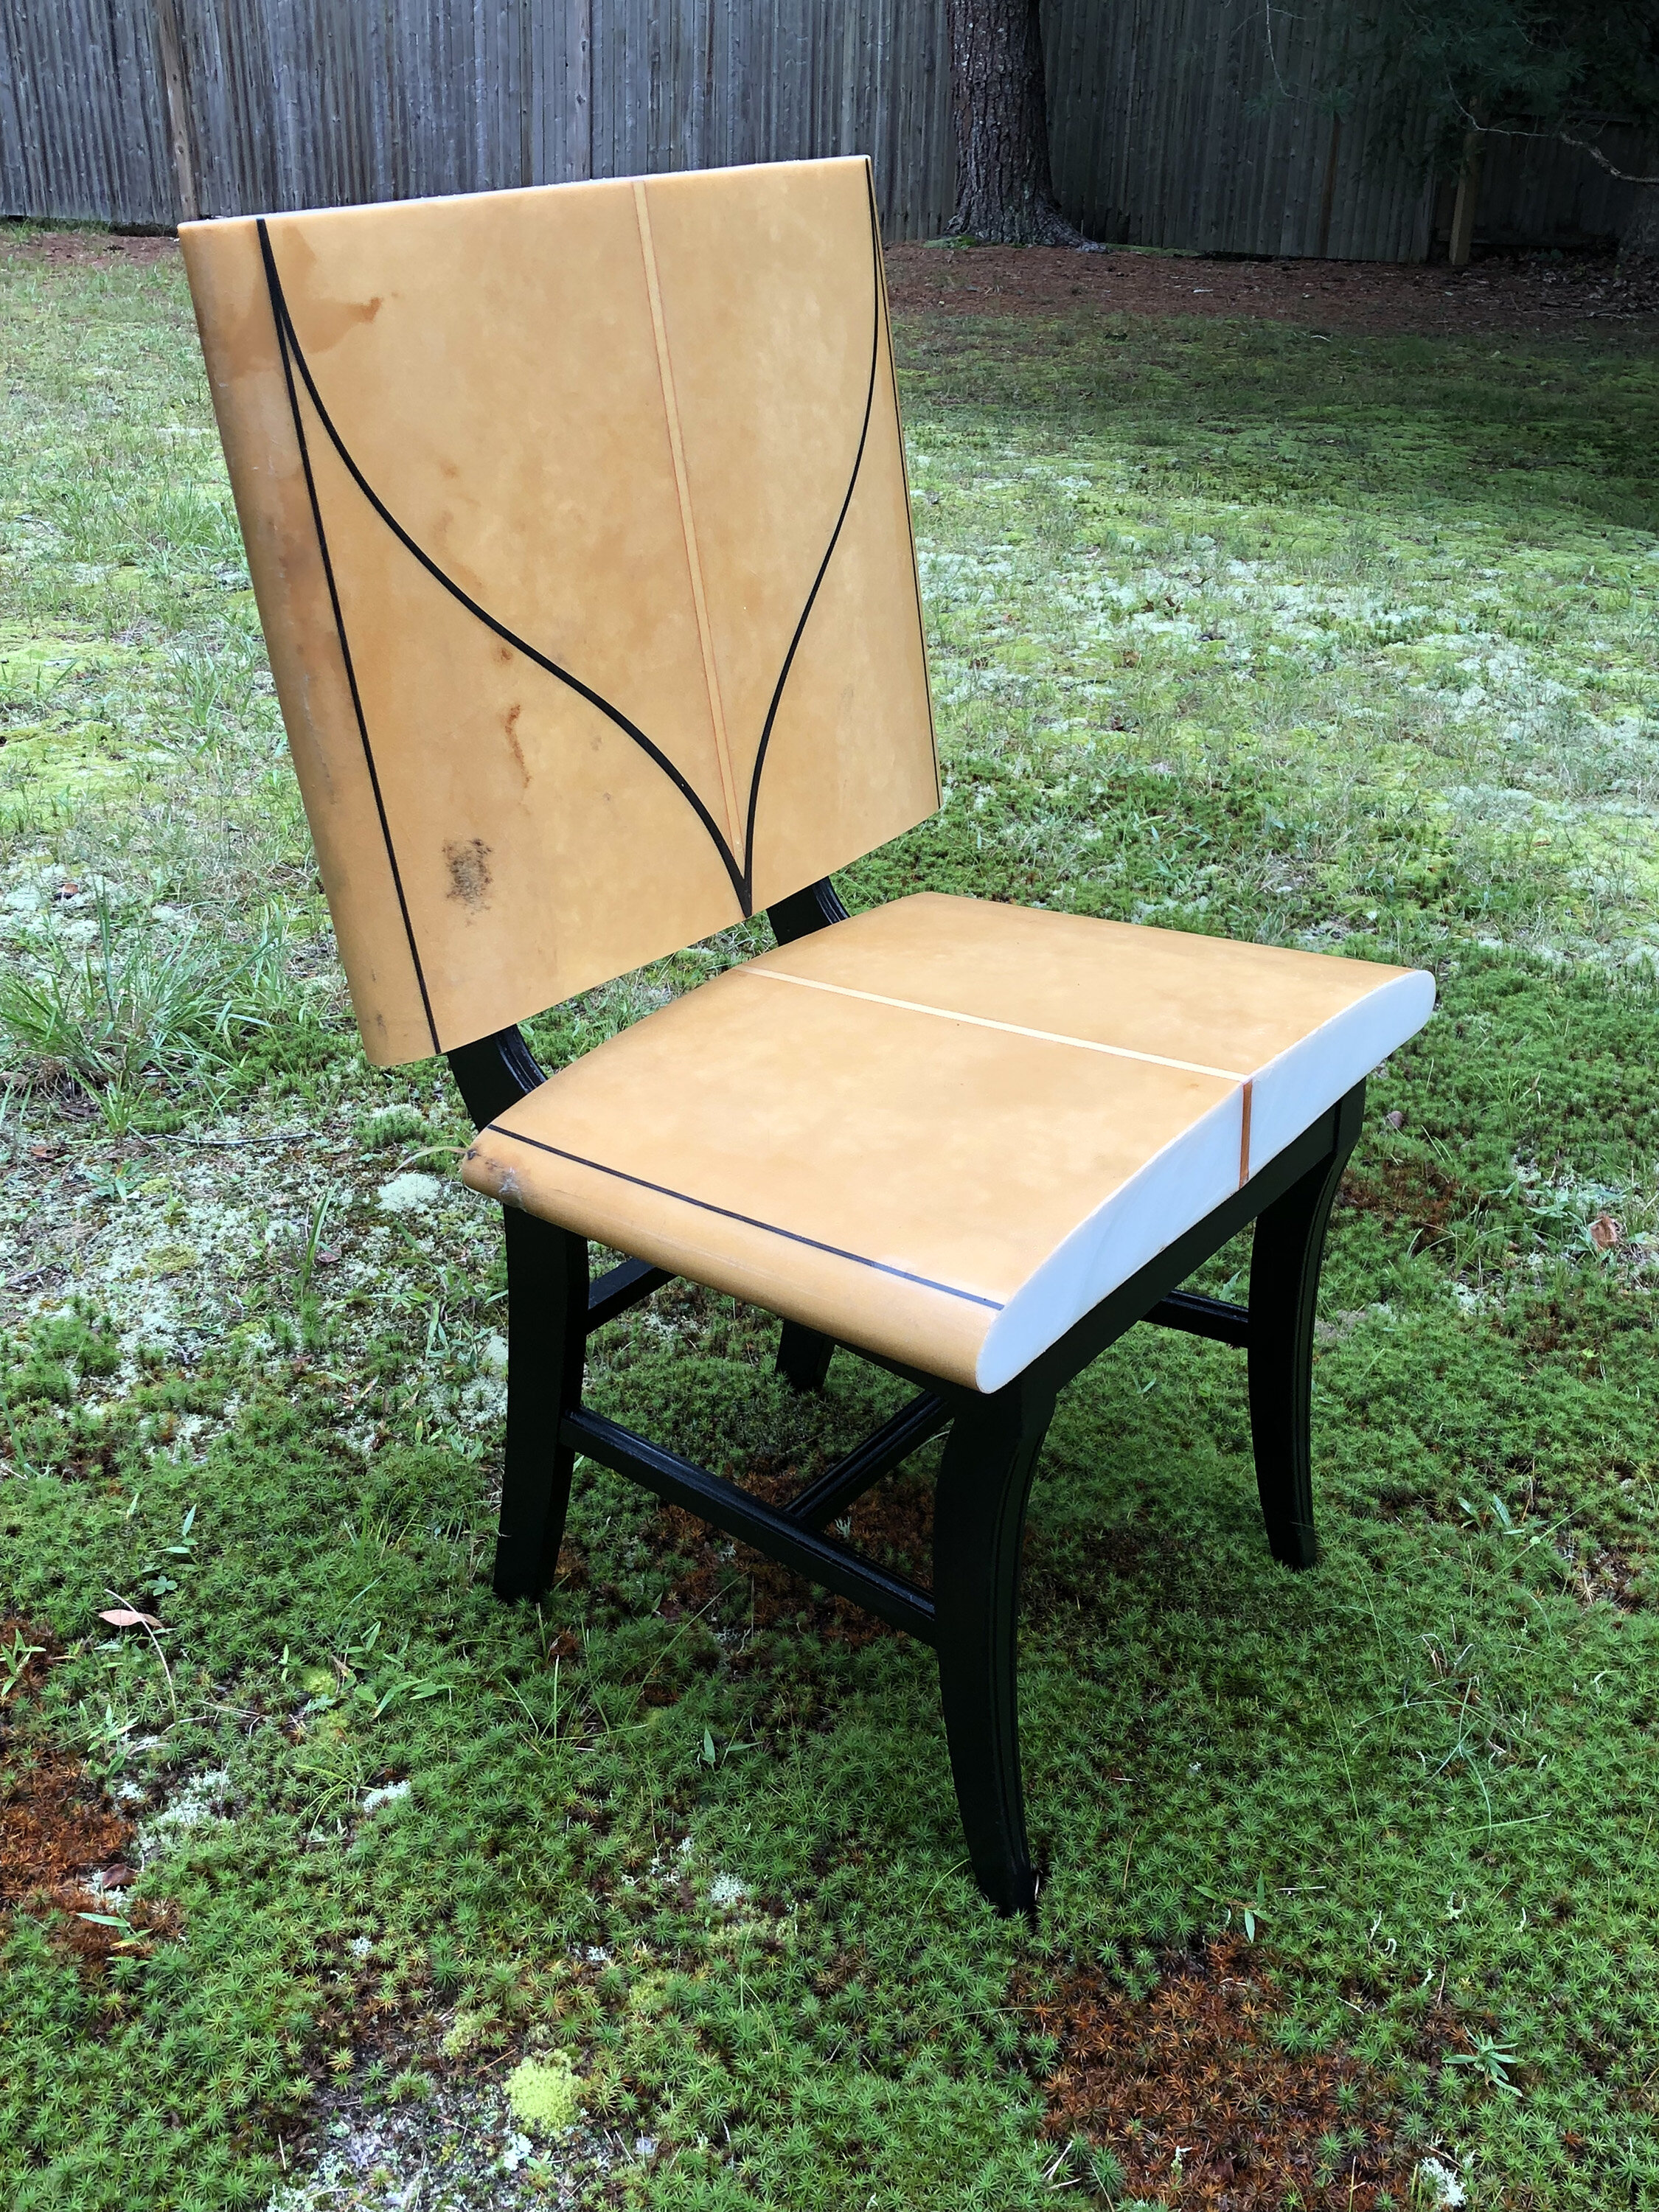    Arabesque Chair    reclaimed longboard, chair frame, latex paint, hardware  40” x 22” x20”  2019  (sold) 